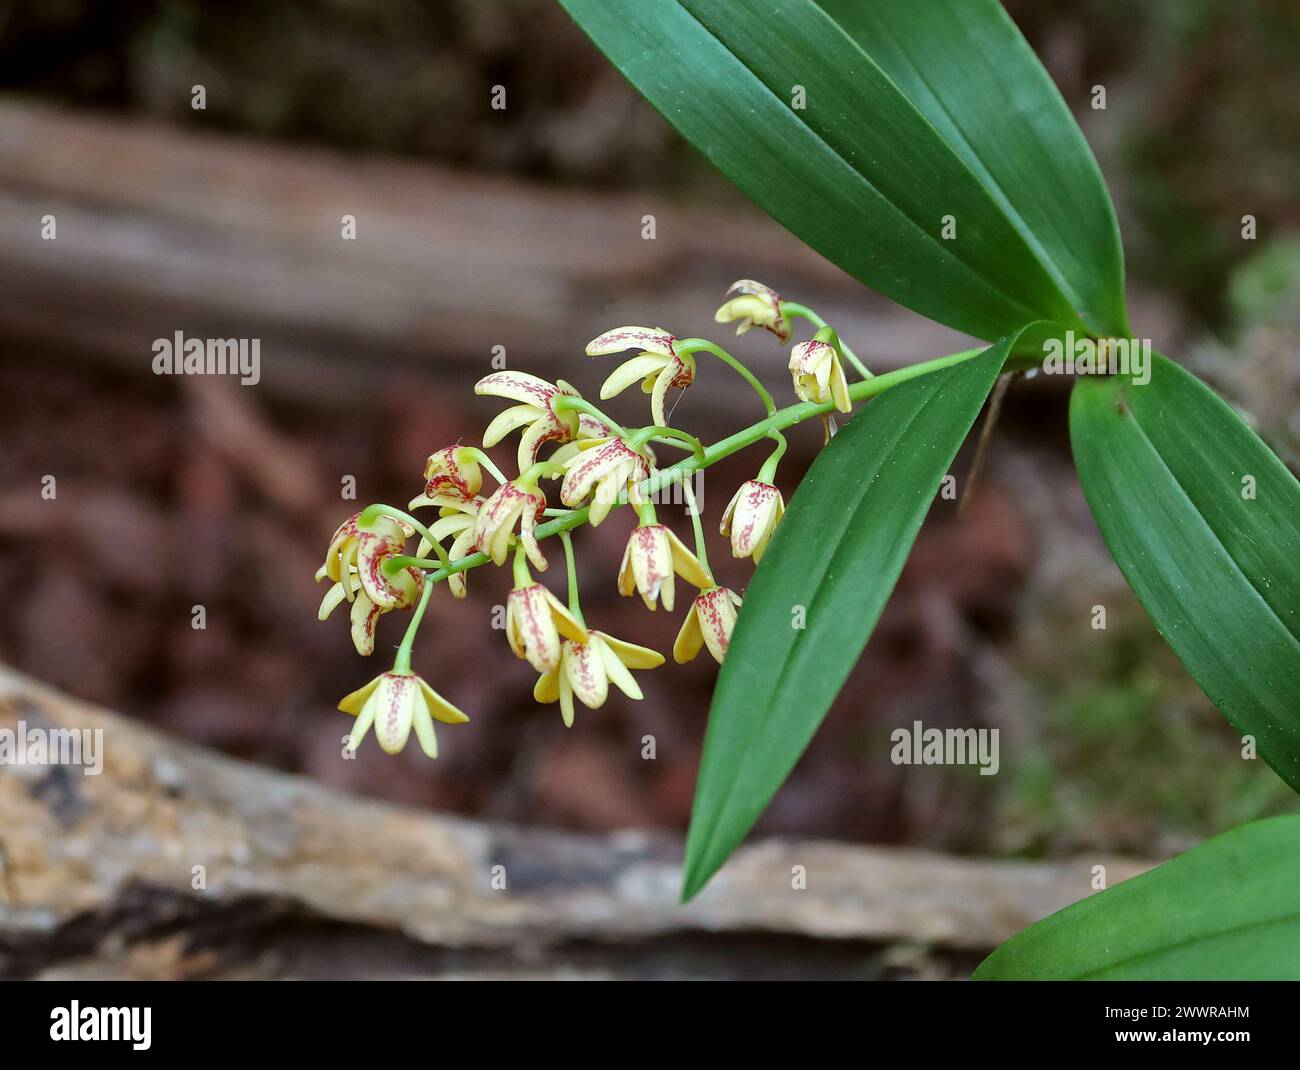 Gefleckte Cane Orchid oder gelbe Cane Orchid, Dendrobium gracilicaule, Epidendroideae, Orchidaceae. Stockfoto